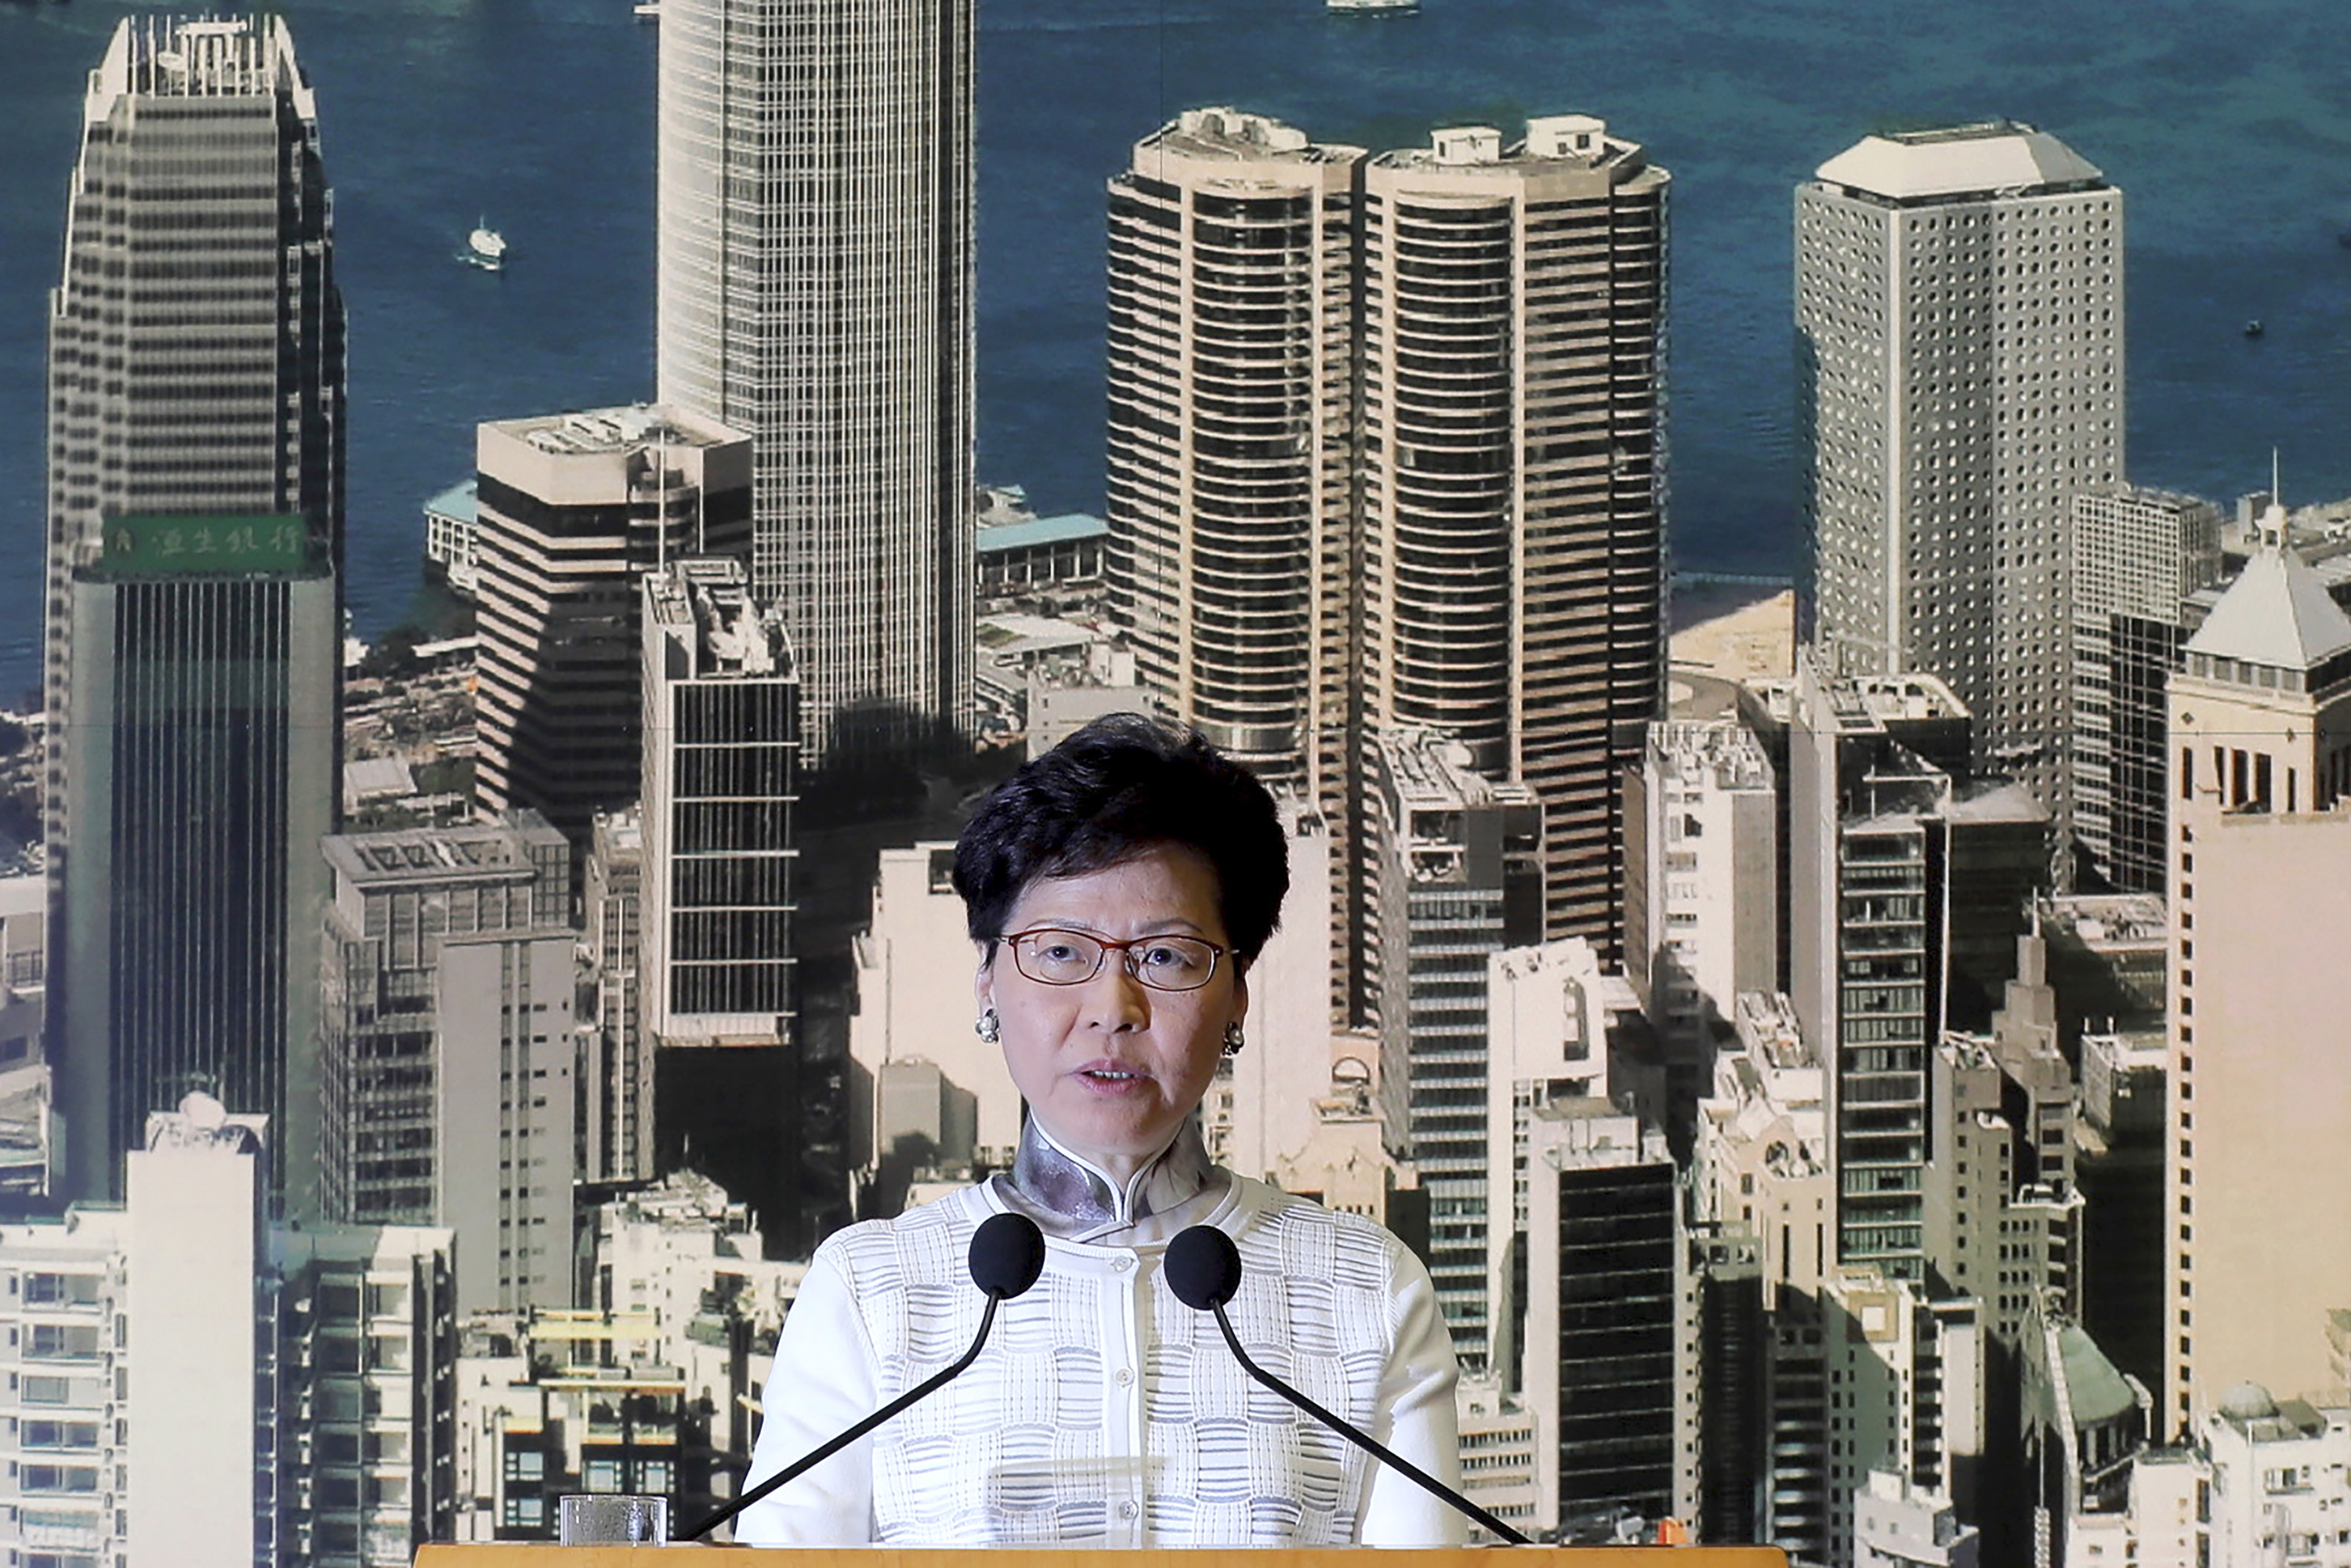 Hong Kong's Chief Executive Carrie Lam arrives holds a press conference in Hong Kong on Saturday, June 15, 2019. Lam said she will suspend a proposed extradition bill indefinitely in response to widespread public unhappiness over the measure, which would enable authorities to send some suspects to stand trial in mainland courts. (AP Photo/Kin Cheung)